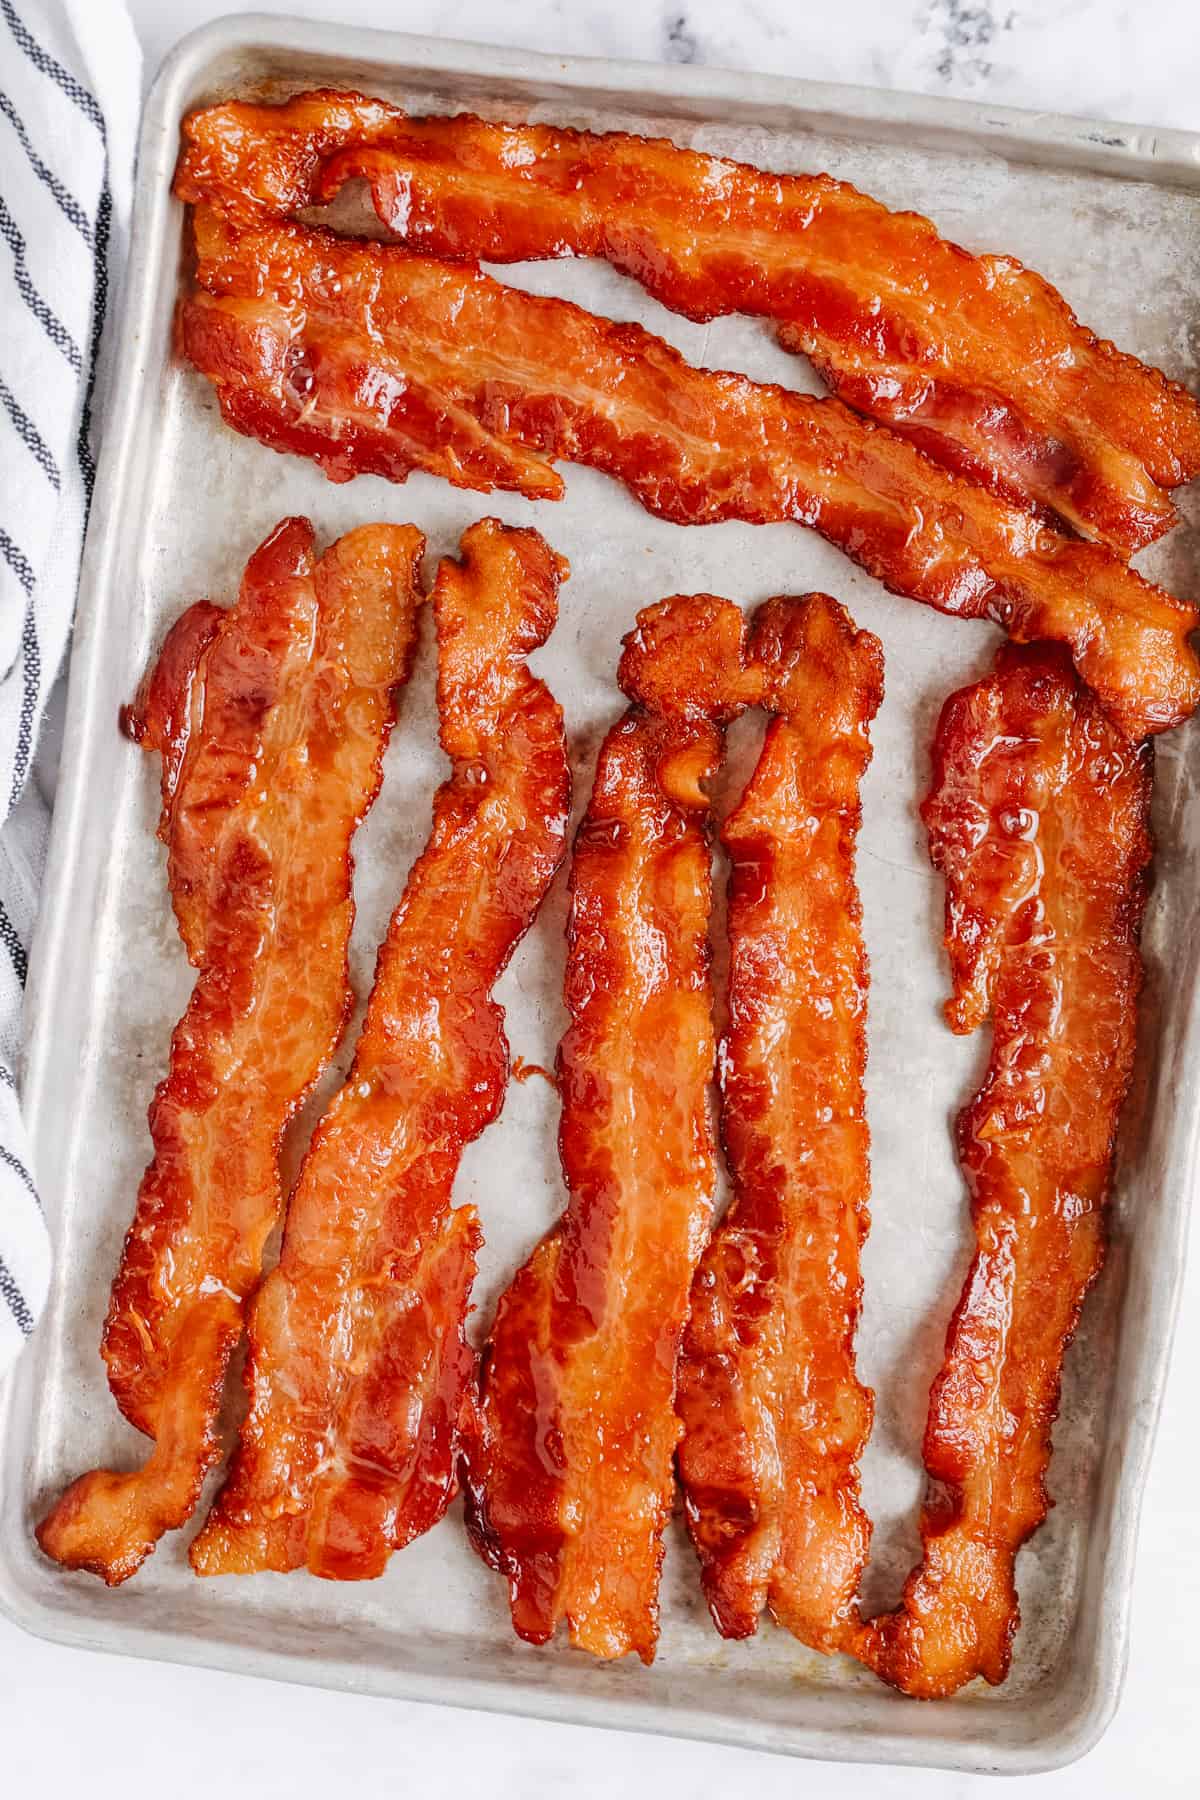 How To Store Cooked Bacon In Freezer